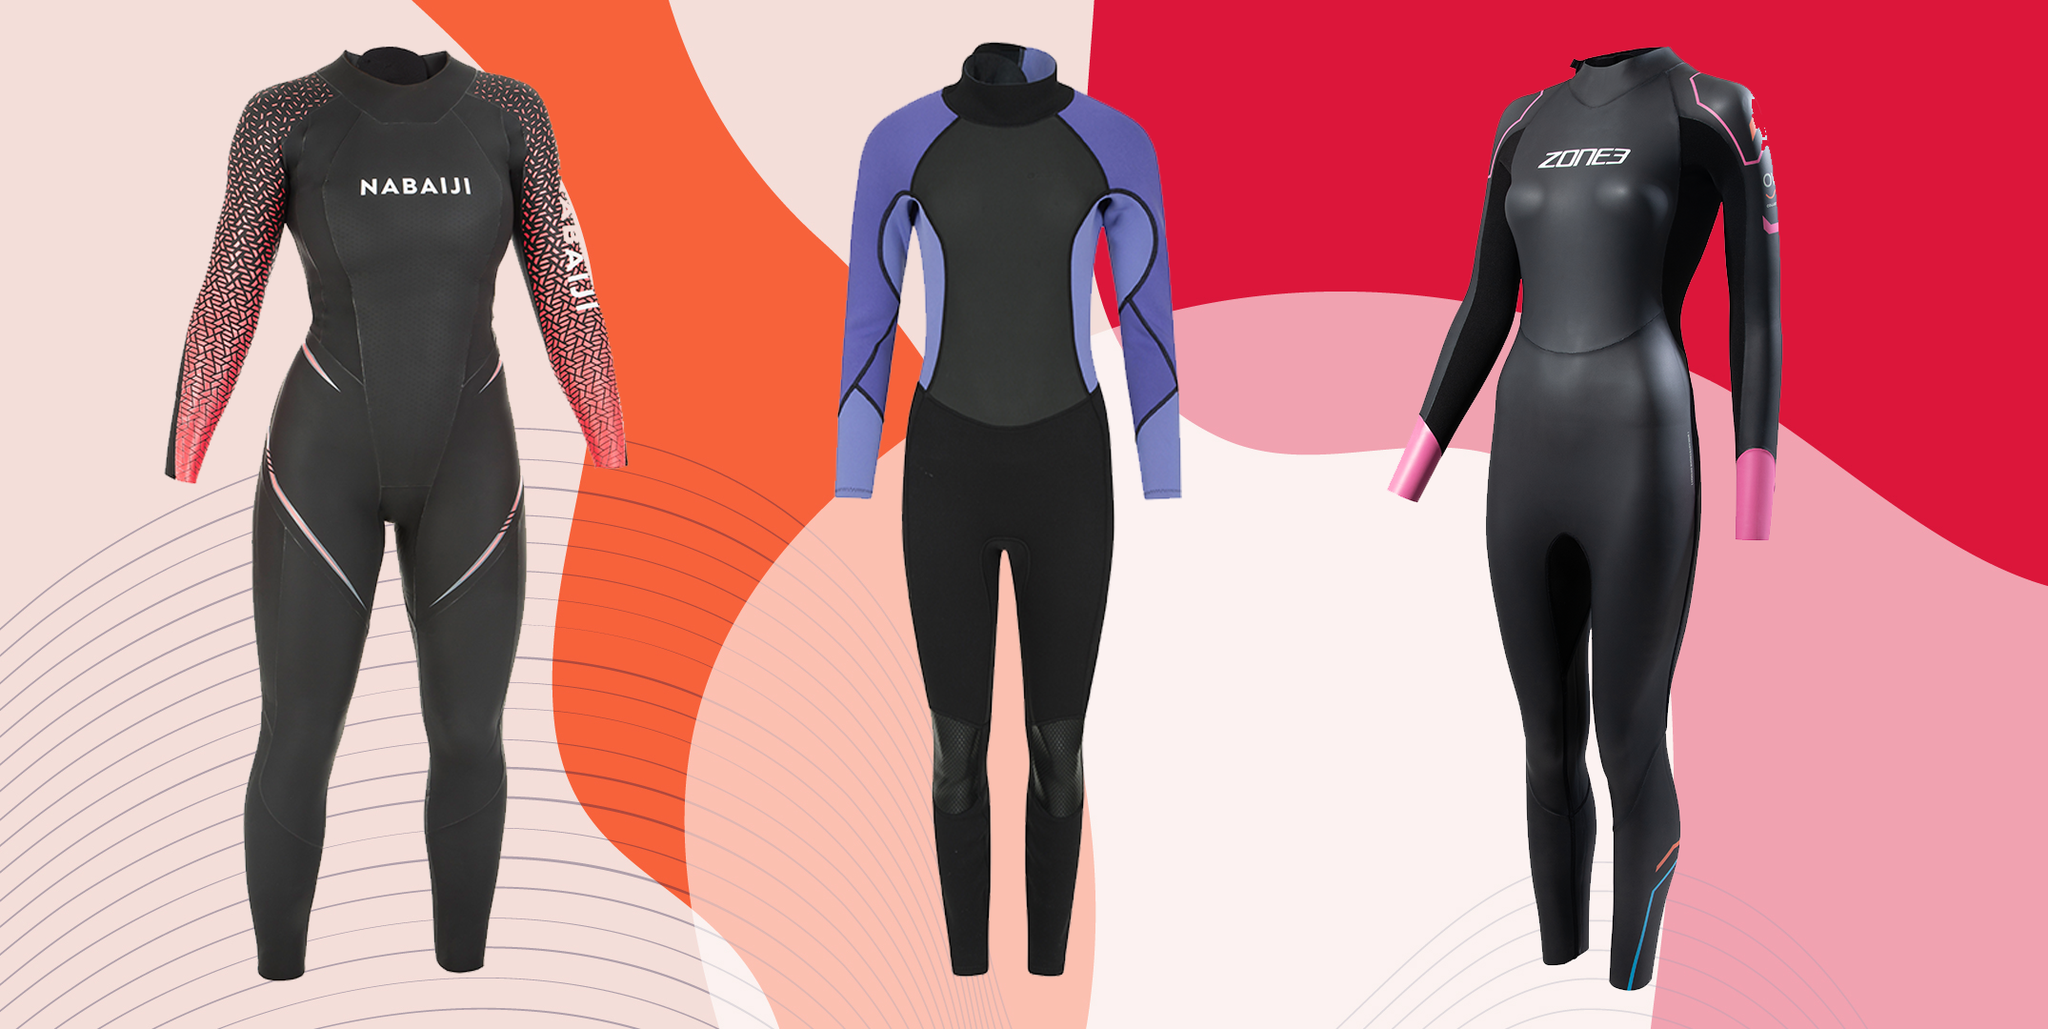 Use the Orca swim scale to find the right wetsuit